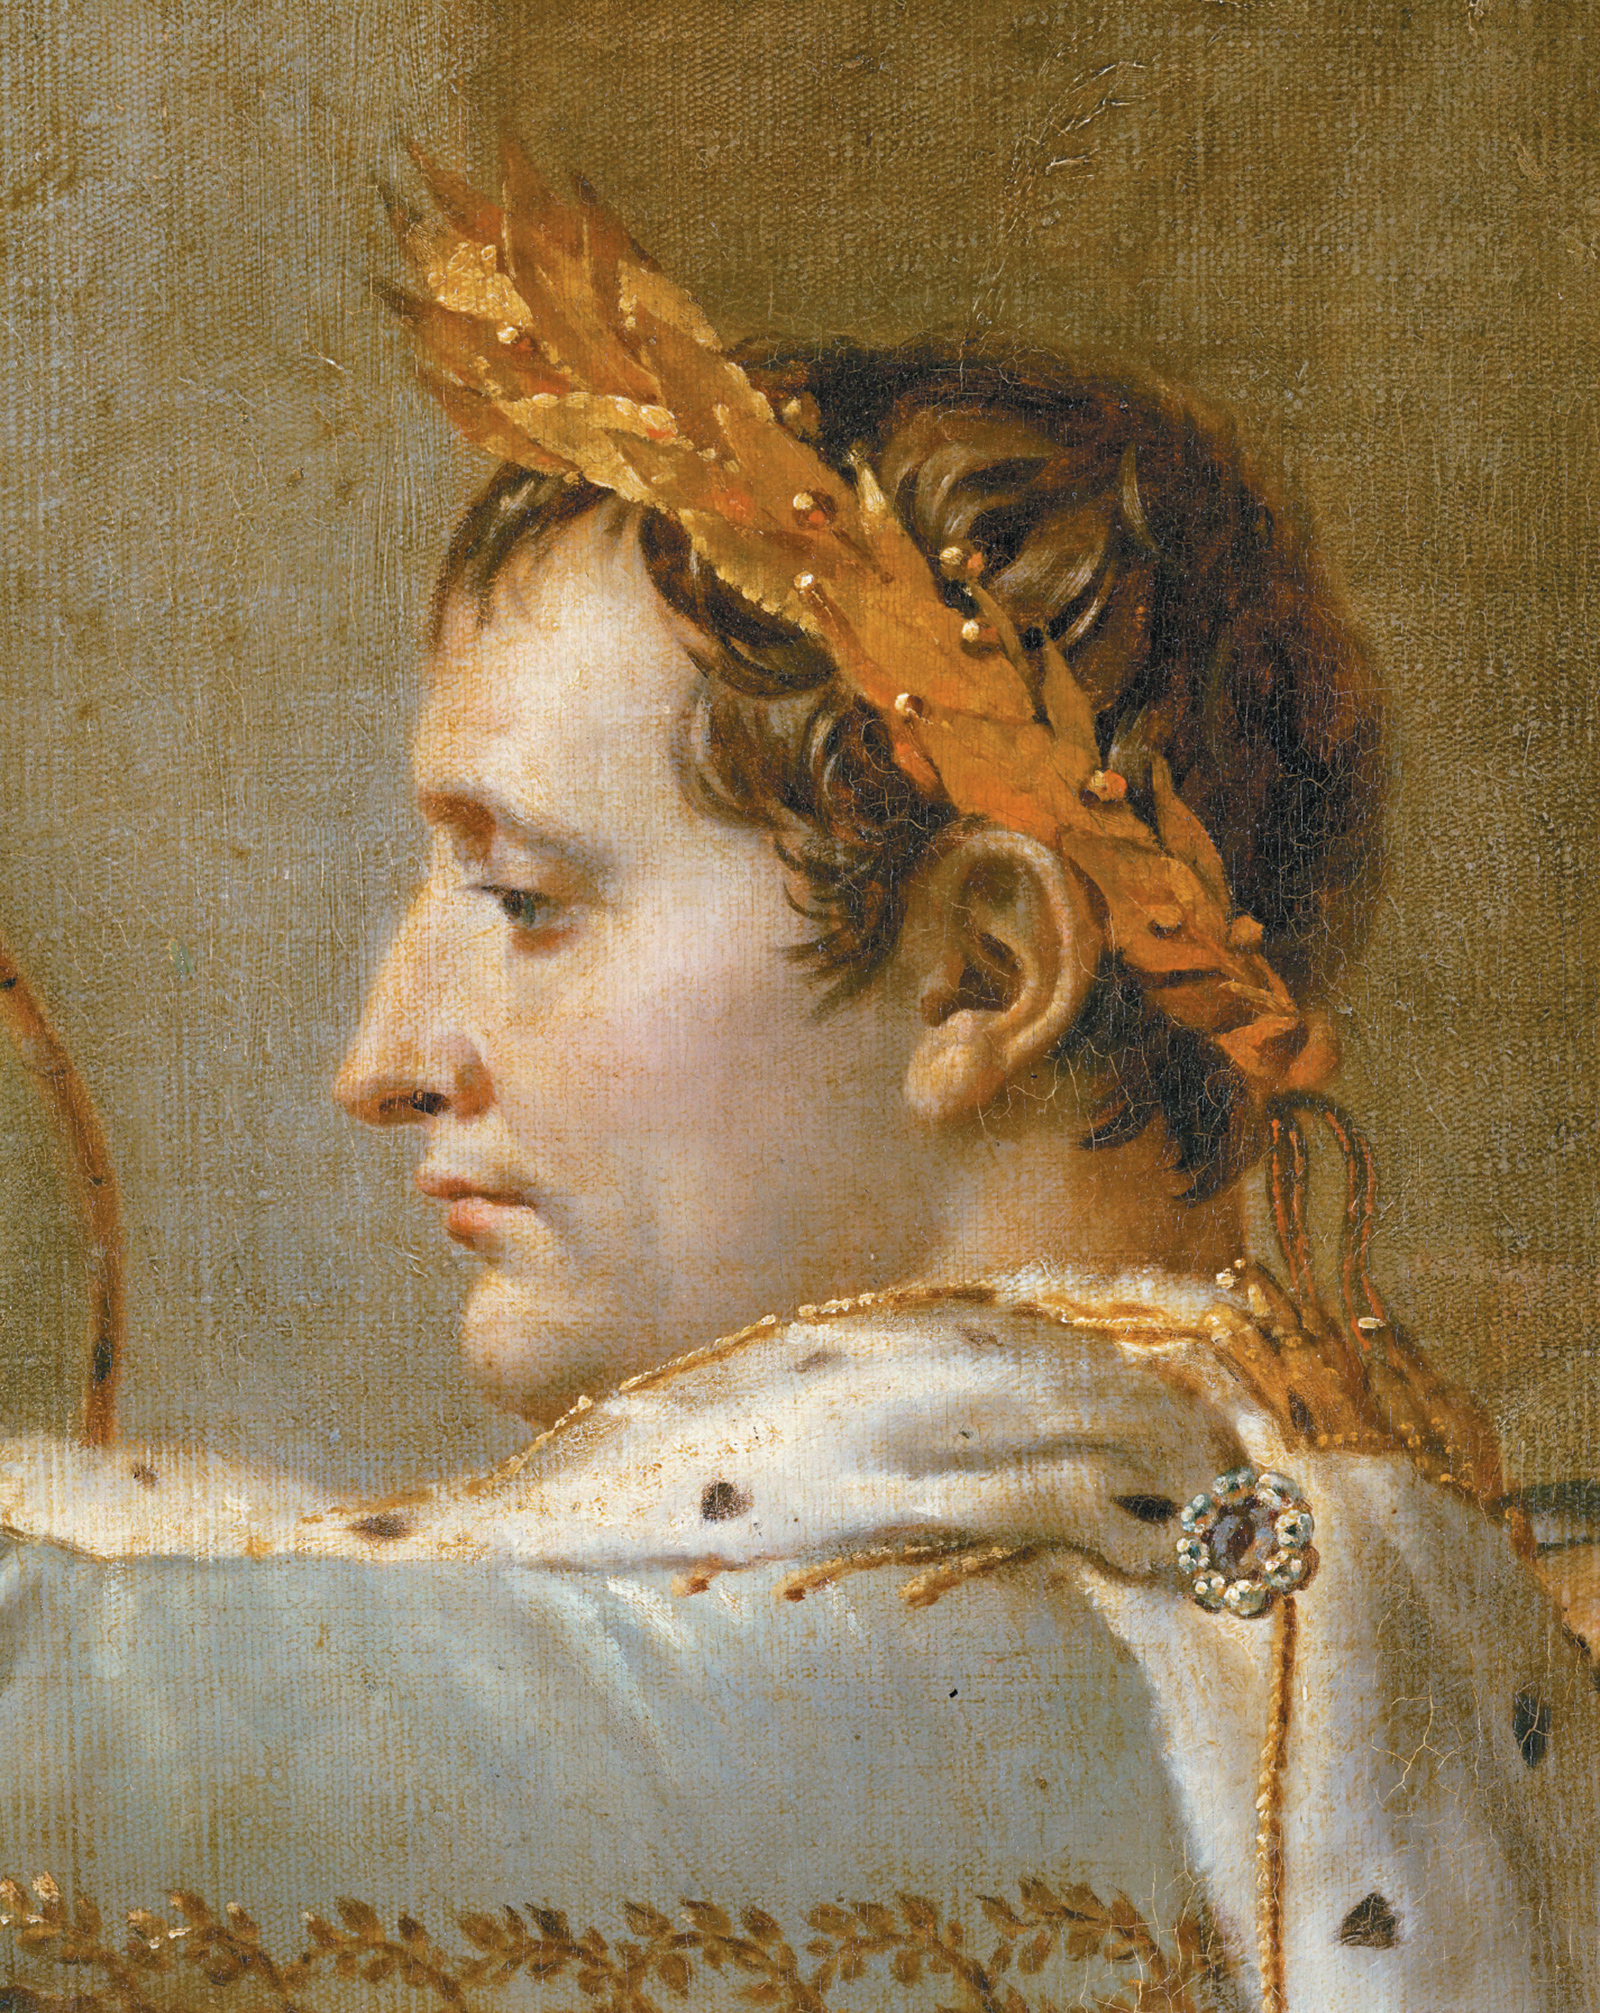 ‘The Coronation of Napoleon’; detail of a painting by Jacques-Louis David, 1806–1807